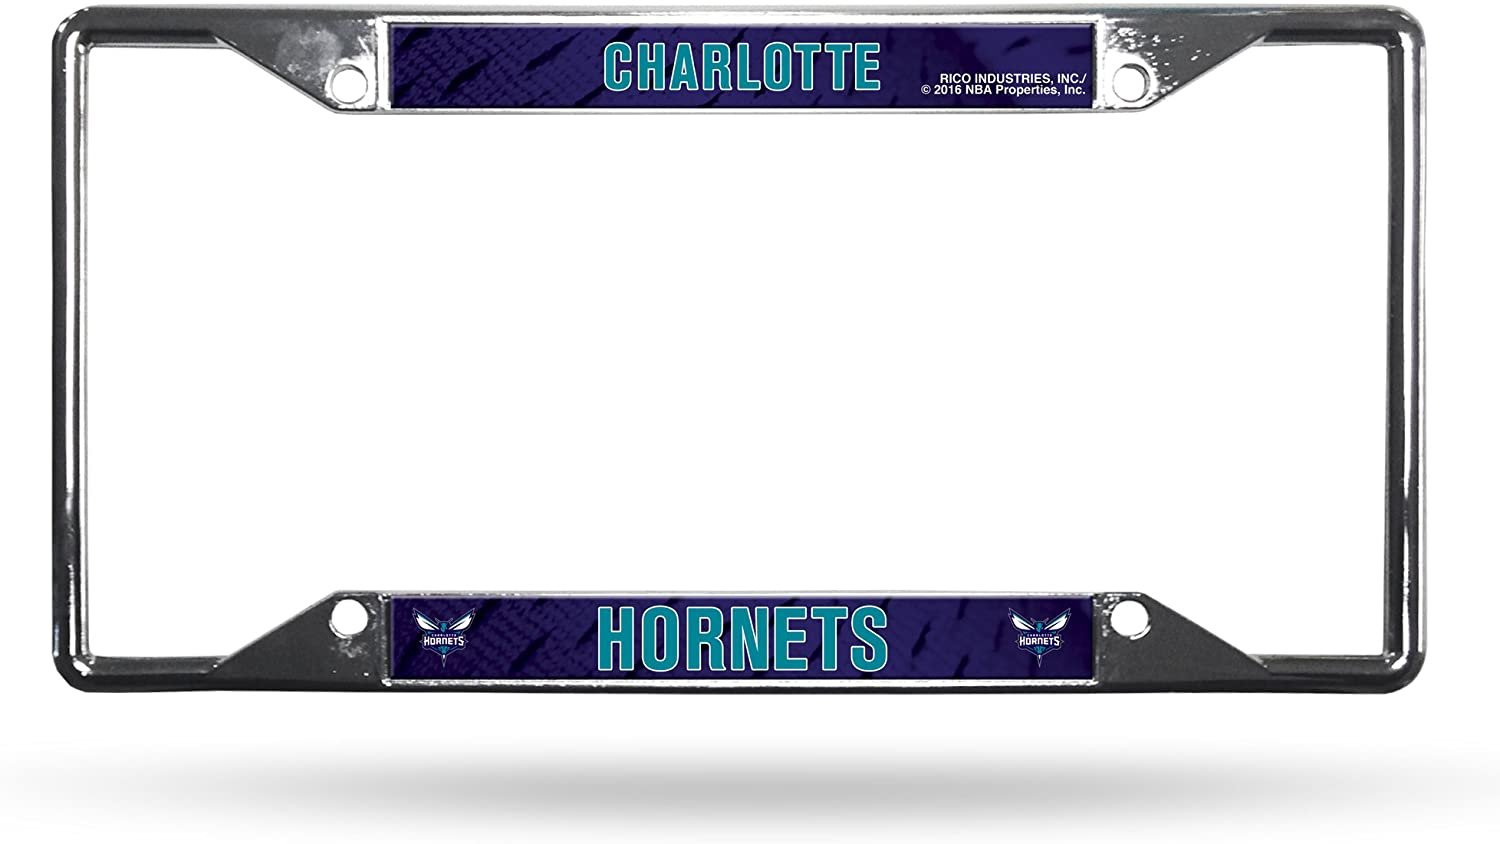 Charlotte Hornets Metal License License Plate Frame Chrome Tag Cover, EZ View Design, 12x6 Inch